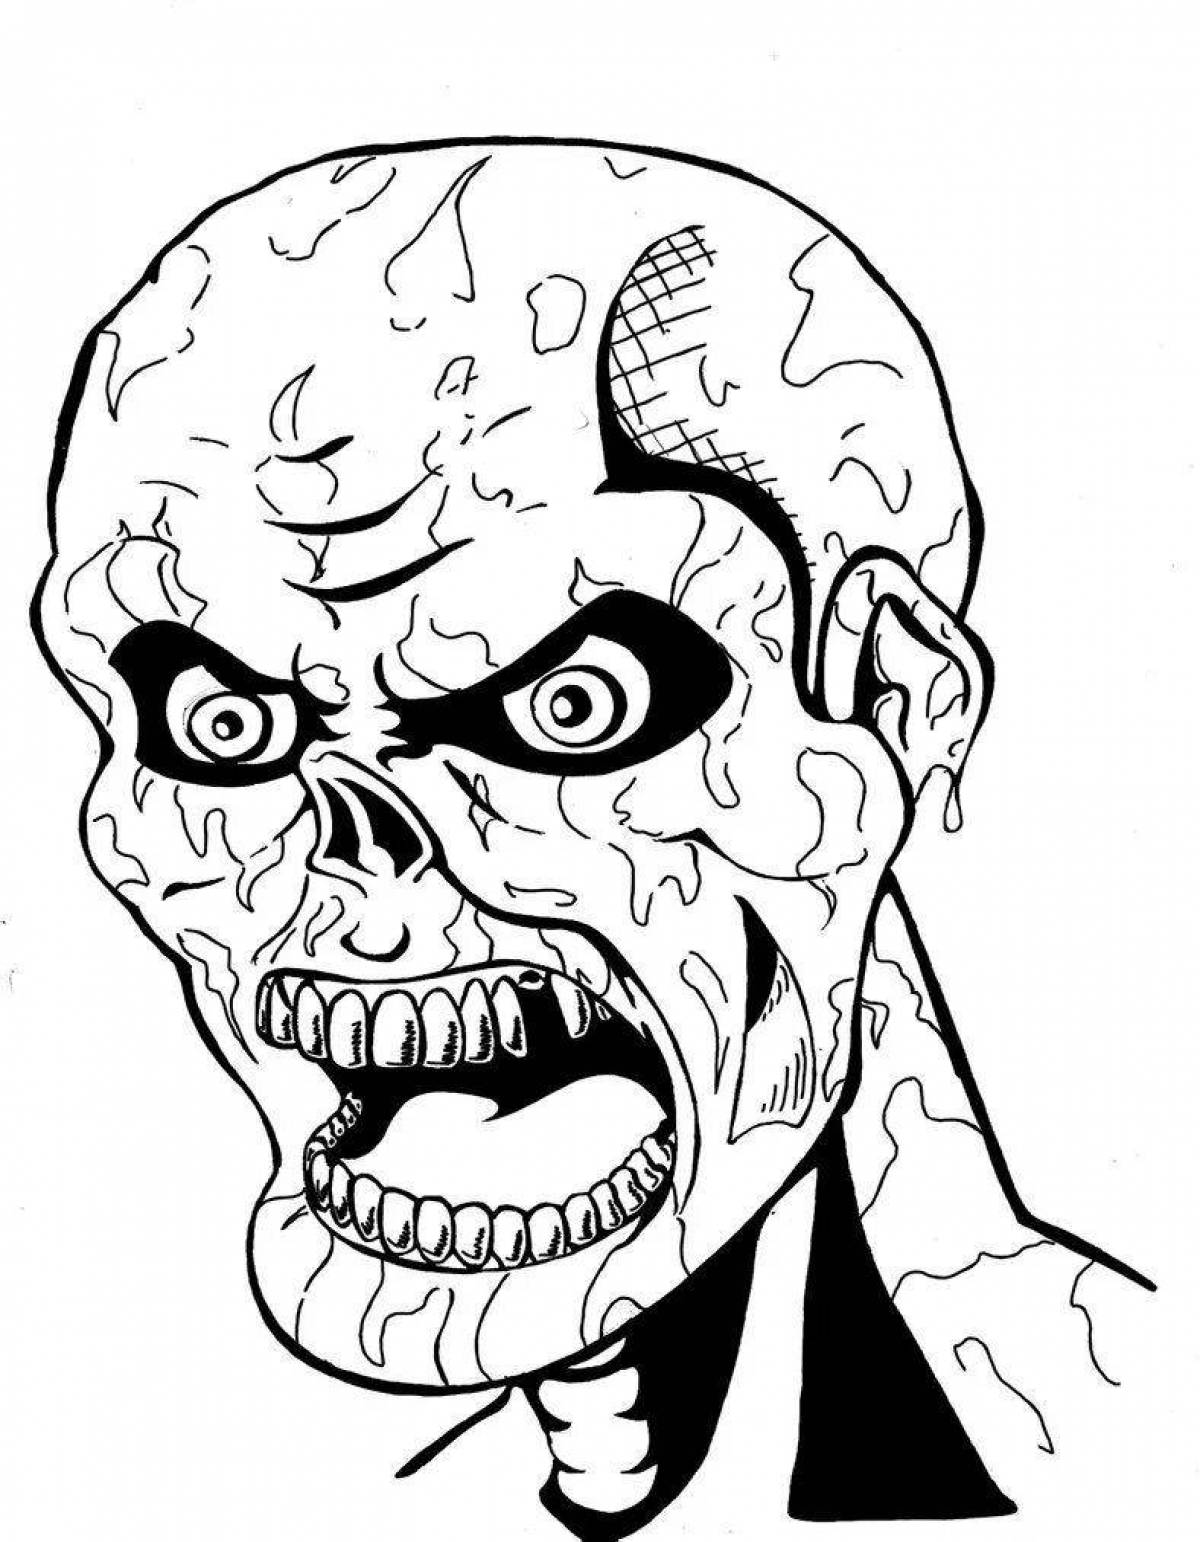 Coloring page disgusting scary monsters